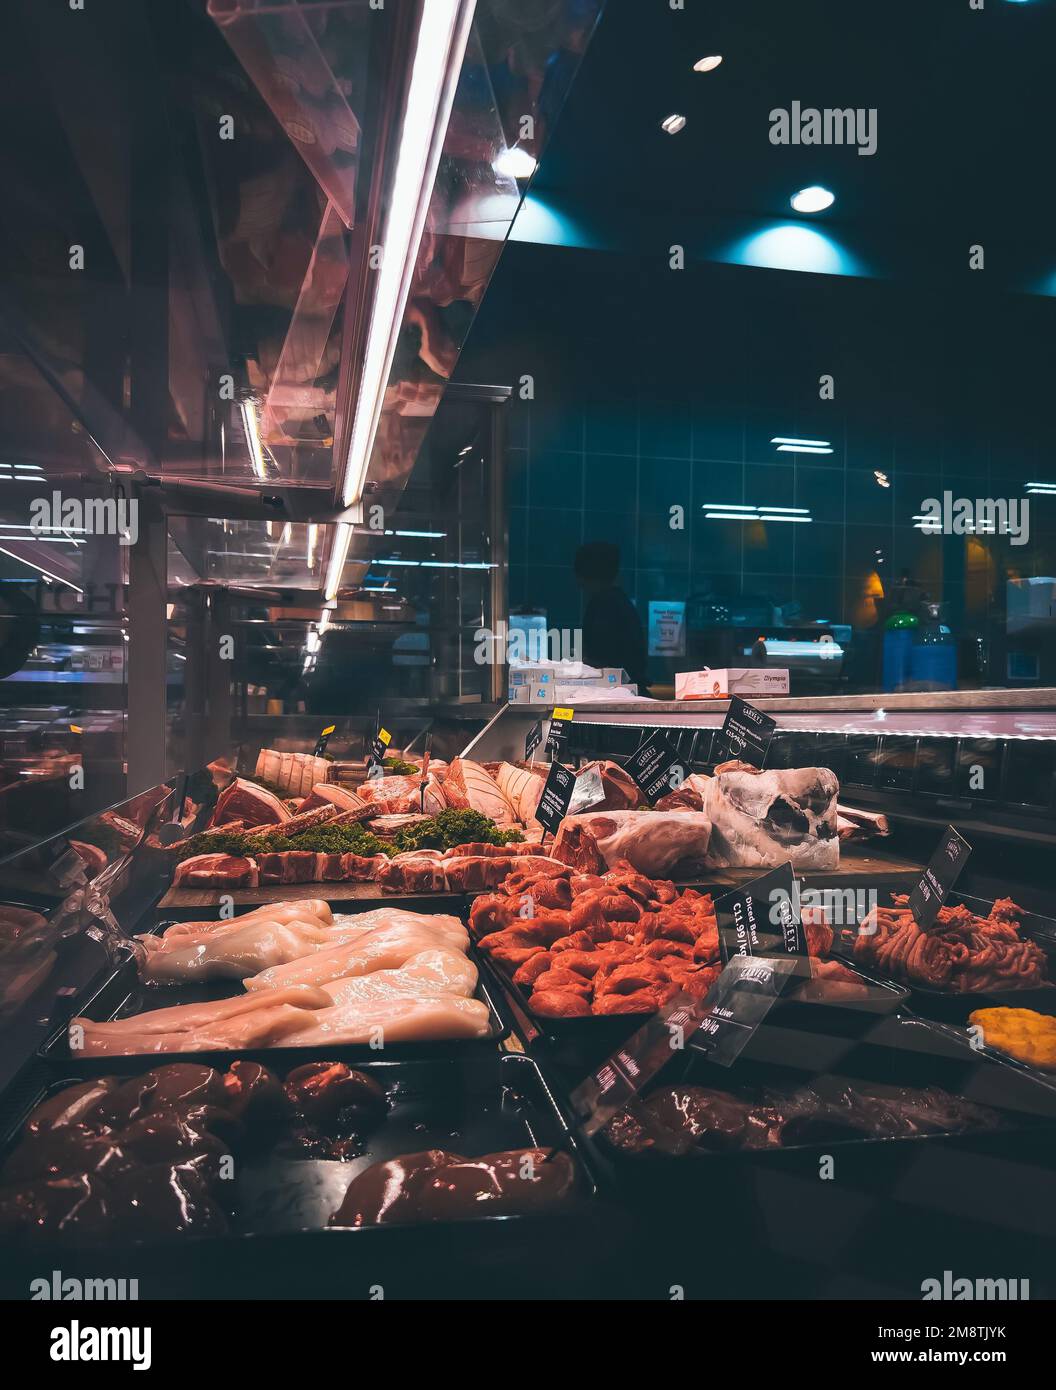 A food market with various types of meats in Dungarvan, Ireland Stock Photo